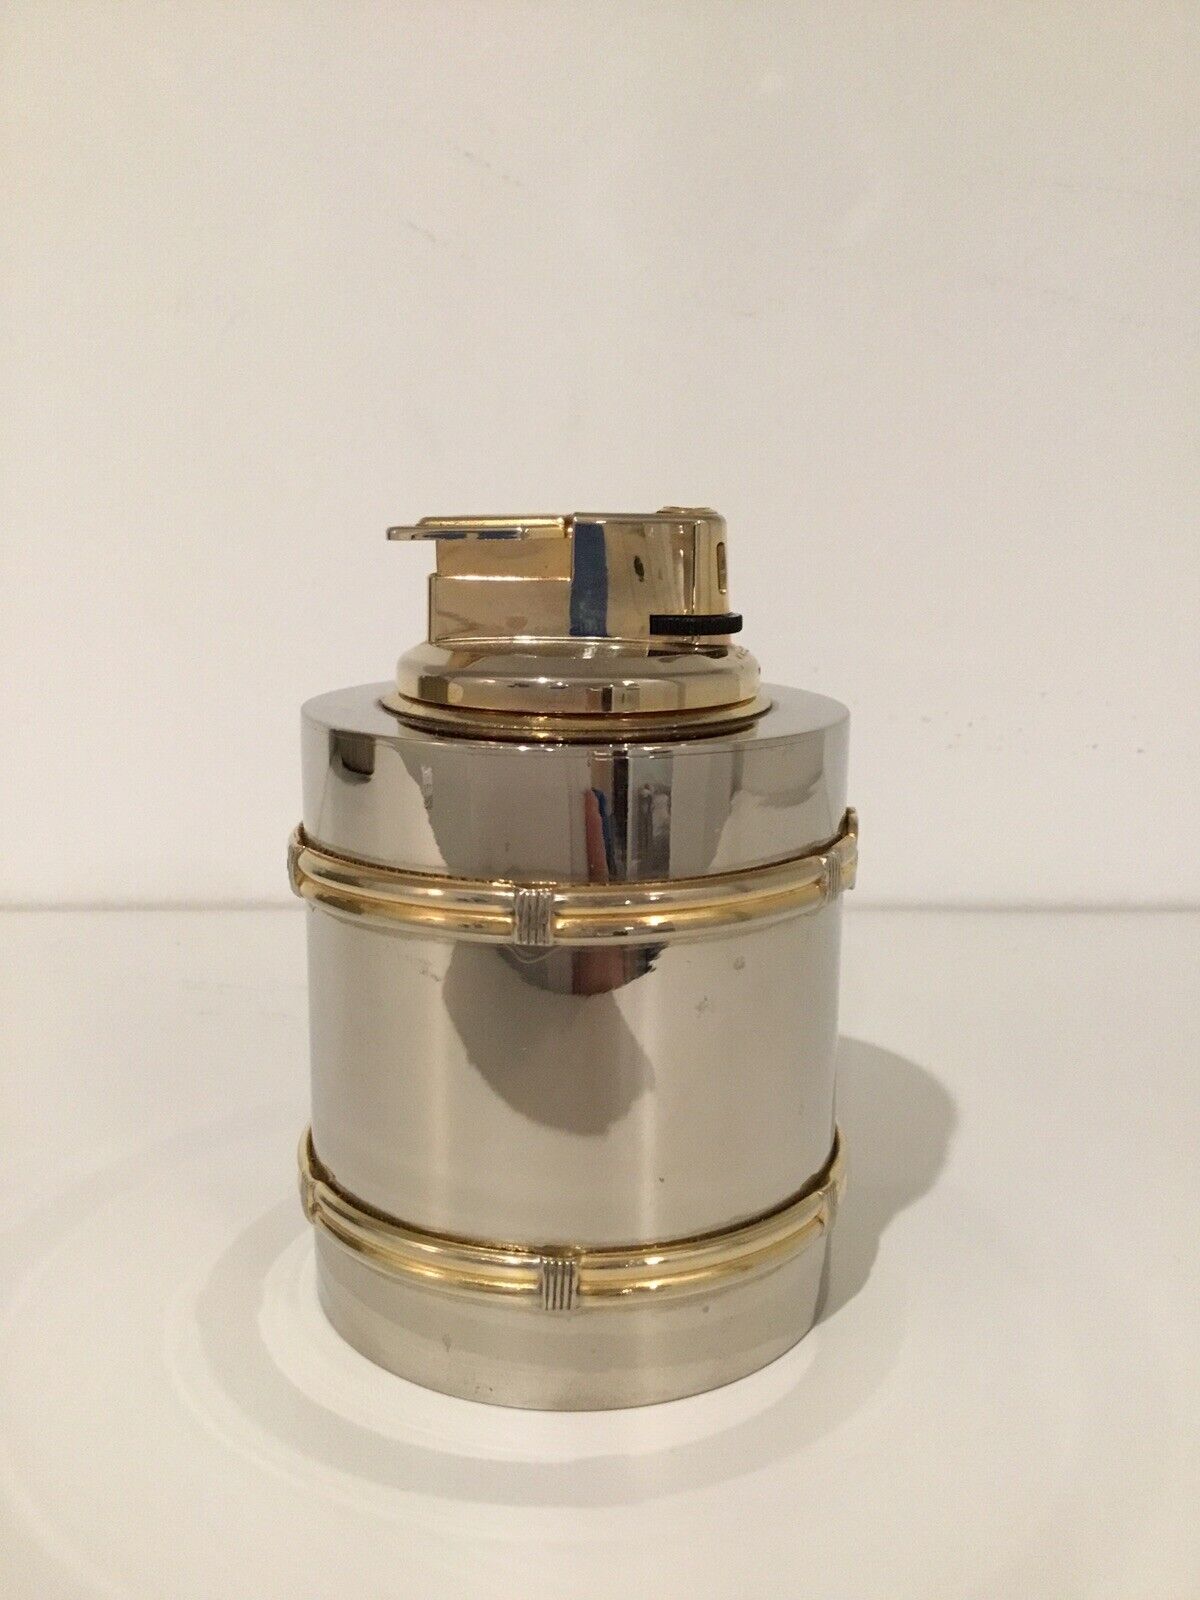 GUCCI 1970s CLASSIC RARE TABLE LIGHTER WITH GOLD-PLATED ROPE DESIGN GUCCI SIGNED